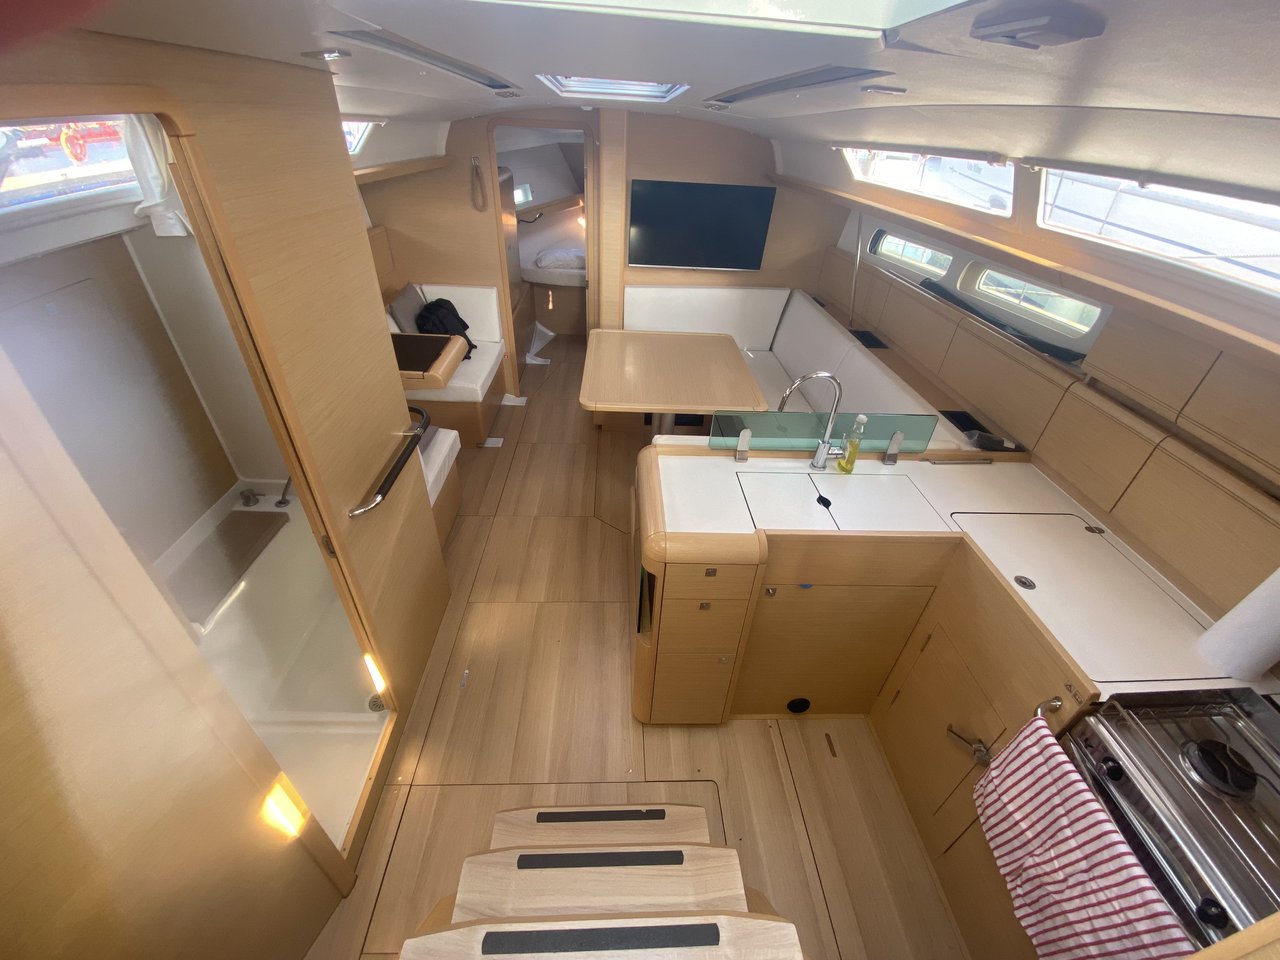 Sun Odyssey 419 - Yacht Charter Firth of Clyde & Boat hire in United Kingdom Scotland Firth of Clyde Largs Largs Yacht Haven 3